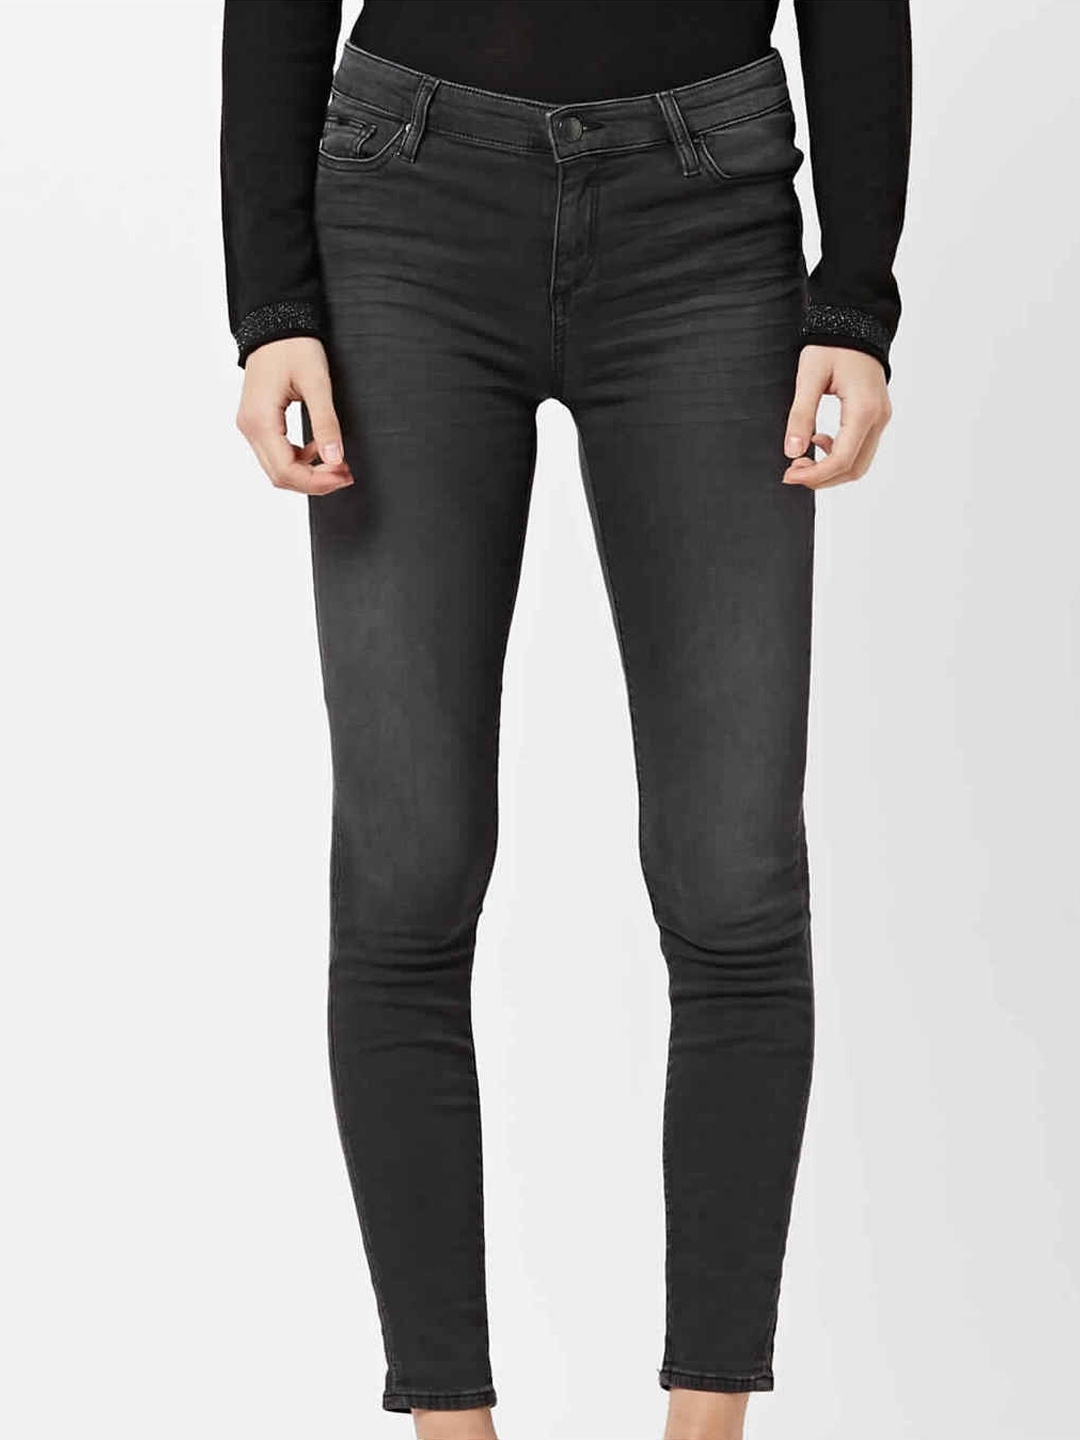 Women's Star motion mid wash skinny fit jeans